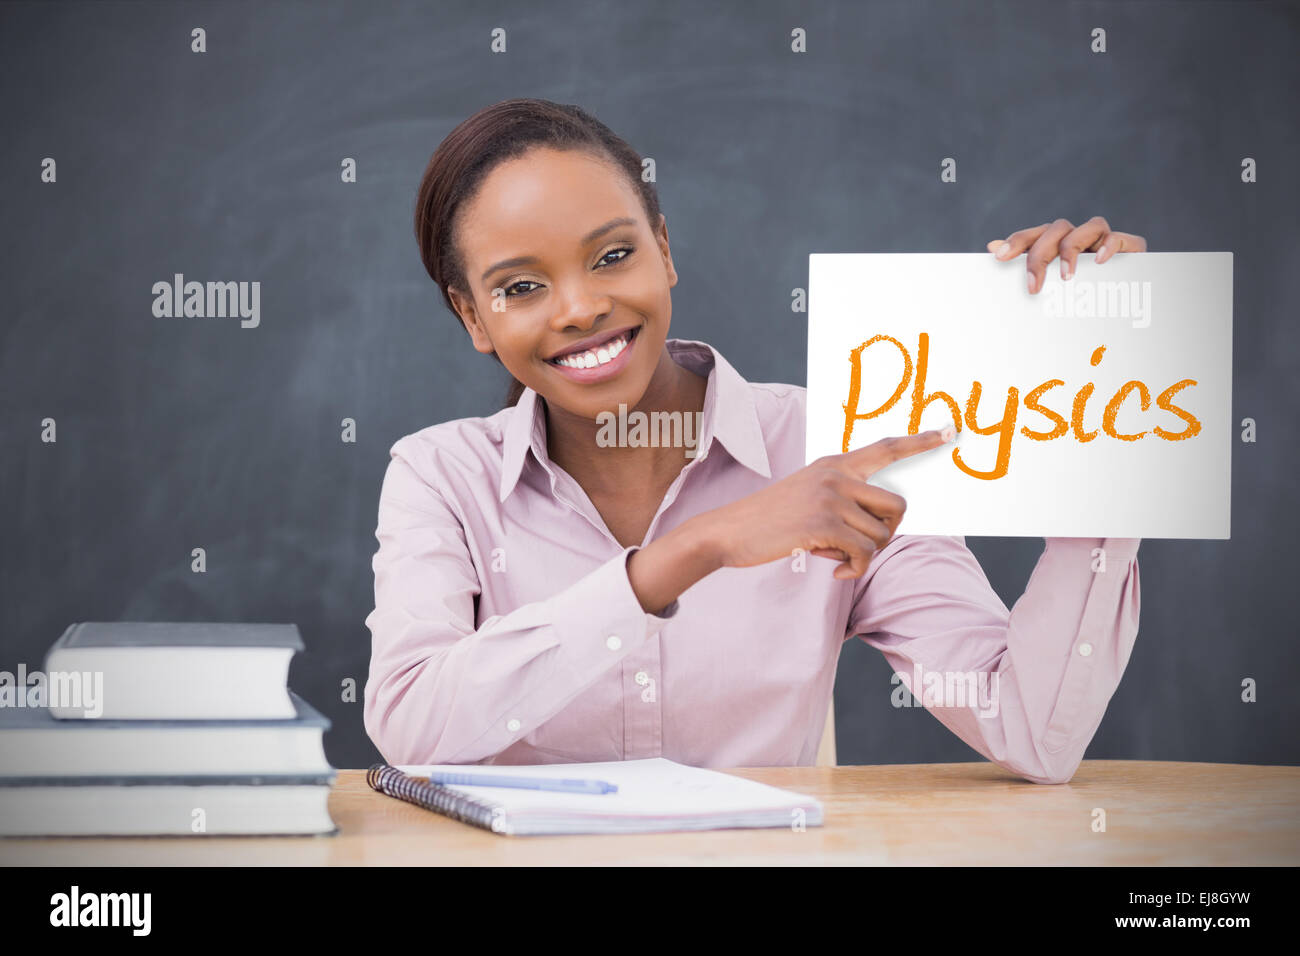 happy-teacher-holding-page-showing-physi